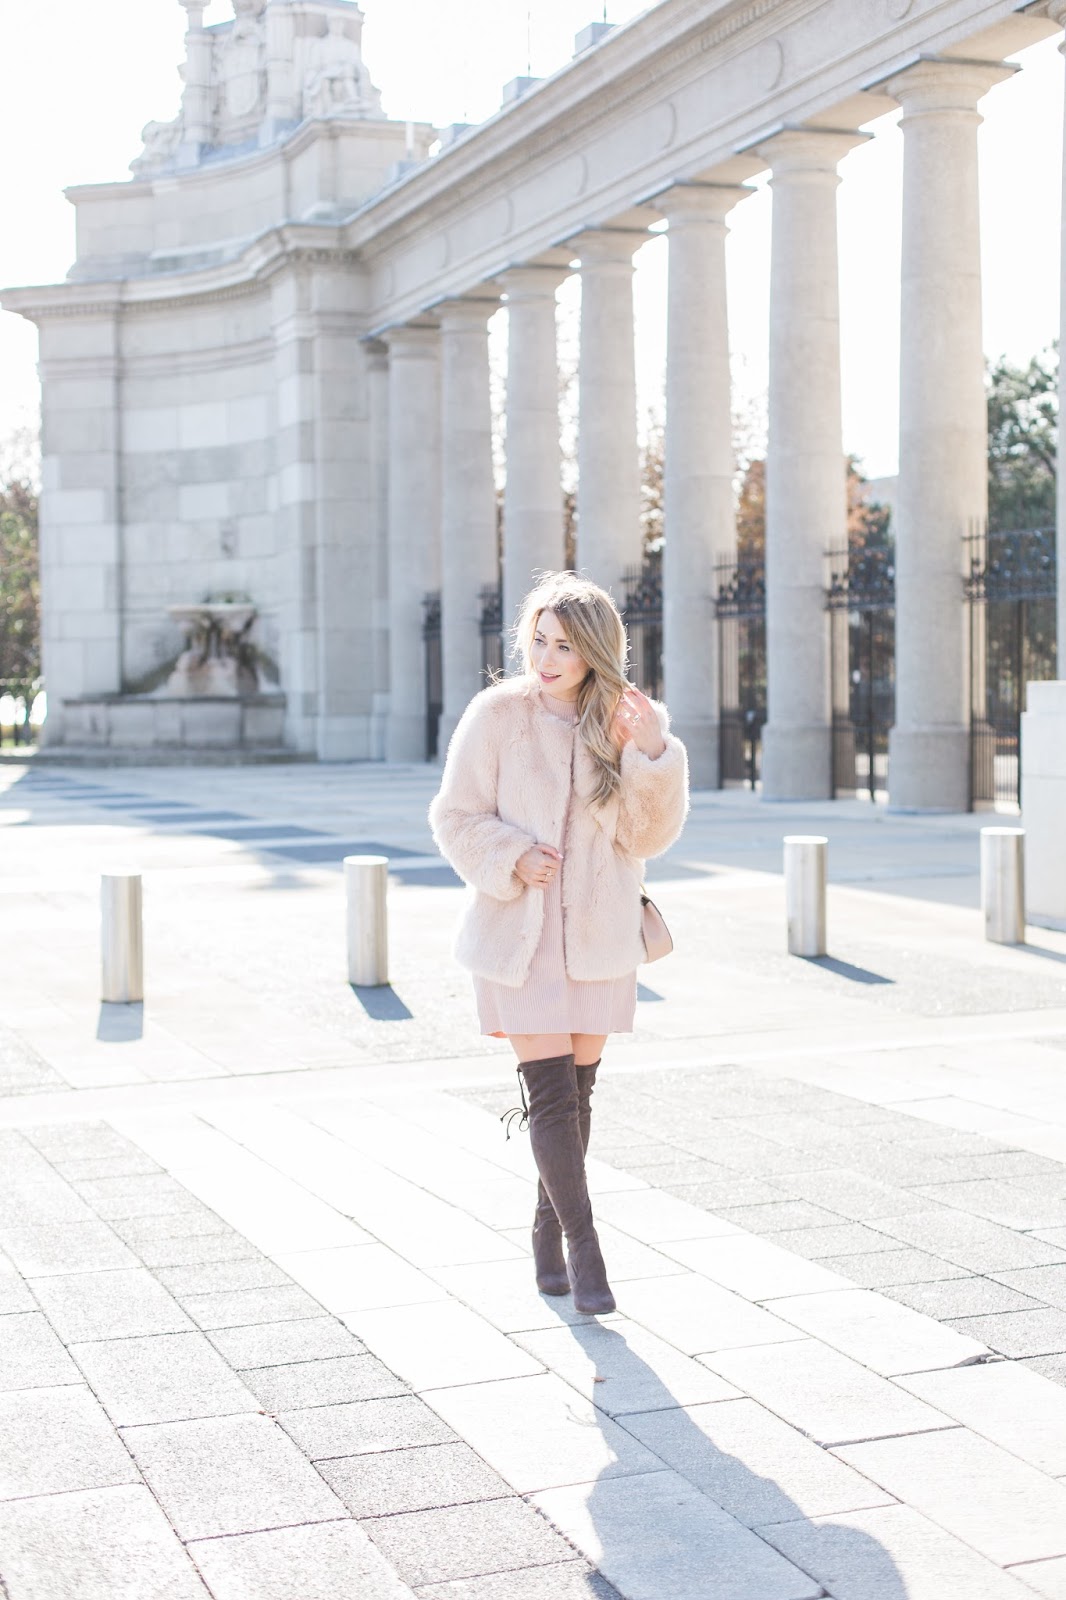 OOTD - Winter Chic with Faux-Fur, La Petite Noob